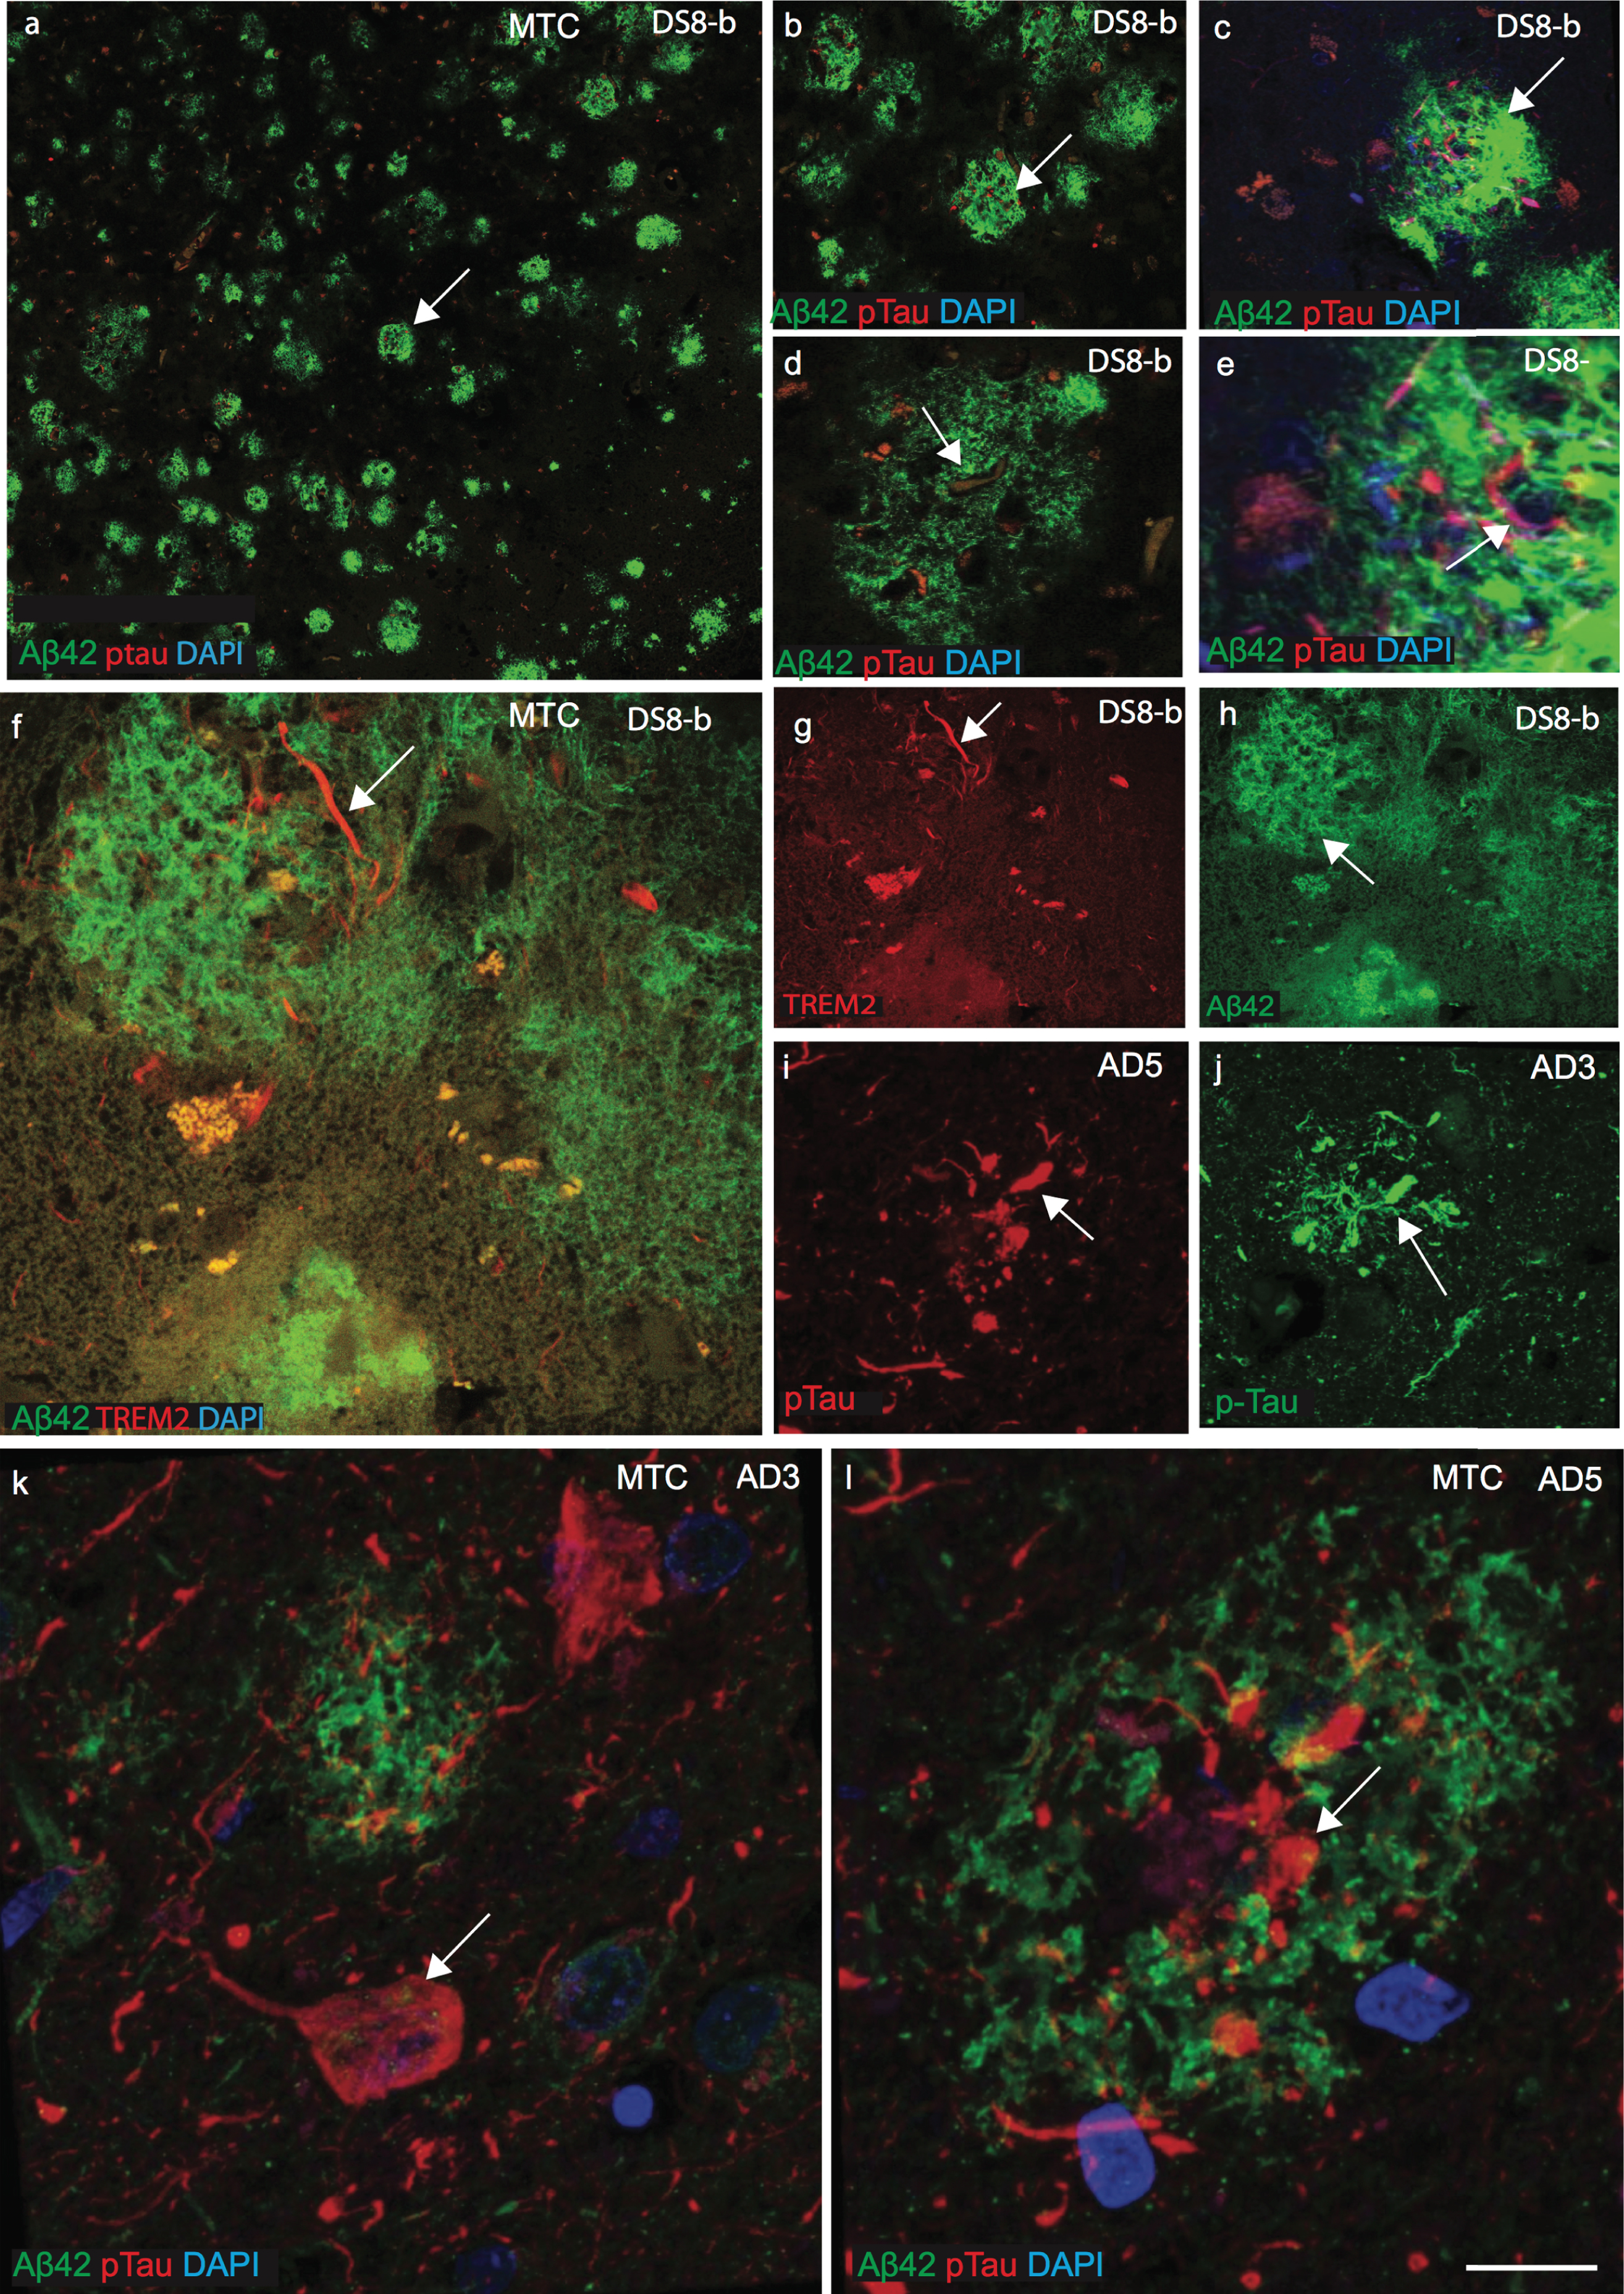 TREM2 and tau proteins did not co-localize with Aβ42 senile plaques in mid temporal cortex. Double immunofluorescence staining and confocal images were performed on the mid temporal cortex (MTC) of AD and DS brain sections using rabbit monoclonal anti-Aβ42 (rab-mAb Aβ42, green) and mAb anti-phospho-tau (AT8, red) antibody, DAPI for nuclear staining (Blue). Aβ42 immunoreactivity was visible in the senile plaques (SPs) but did not co-localize with p-Tau (a–e). In DS brain (DS8), the layer III of MTC stained for anti-Aβ42 (green) and showed many mature plaques (f and h). TREM2 was only present around the SPs and visible in the neuropil thread (f and g). Further staining of different cases of AD (AD3 and AD5, Supplementary Table 1) and images was captured by confocal microscopy, showed that mature Aβ42 positive SPs did not co-localize with p-Tau positive neurofibrillary tangles. Scale bar in a–c = 50 μm, d-k = 25 μm, and l = 10 μm.